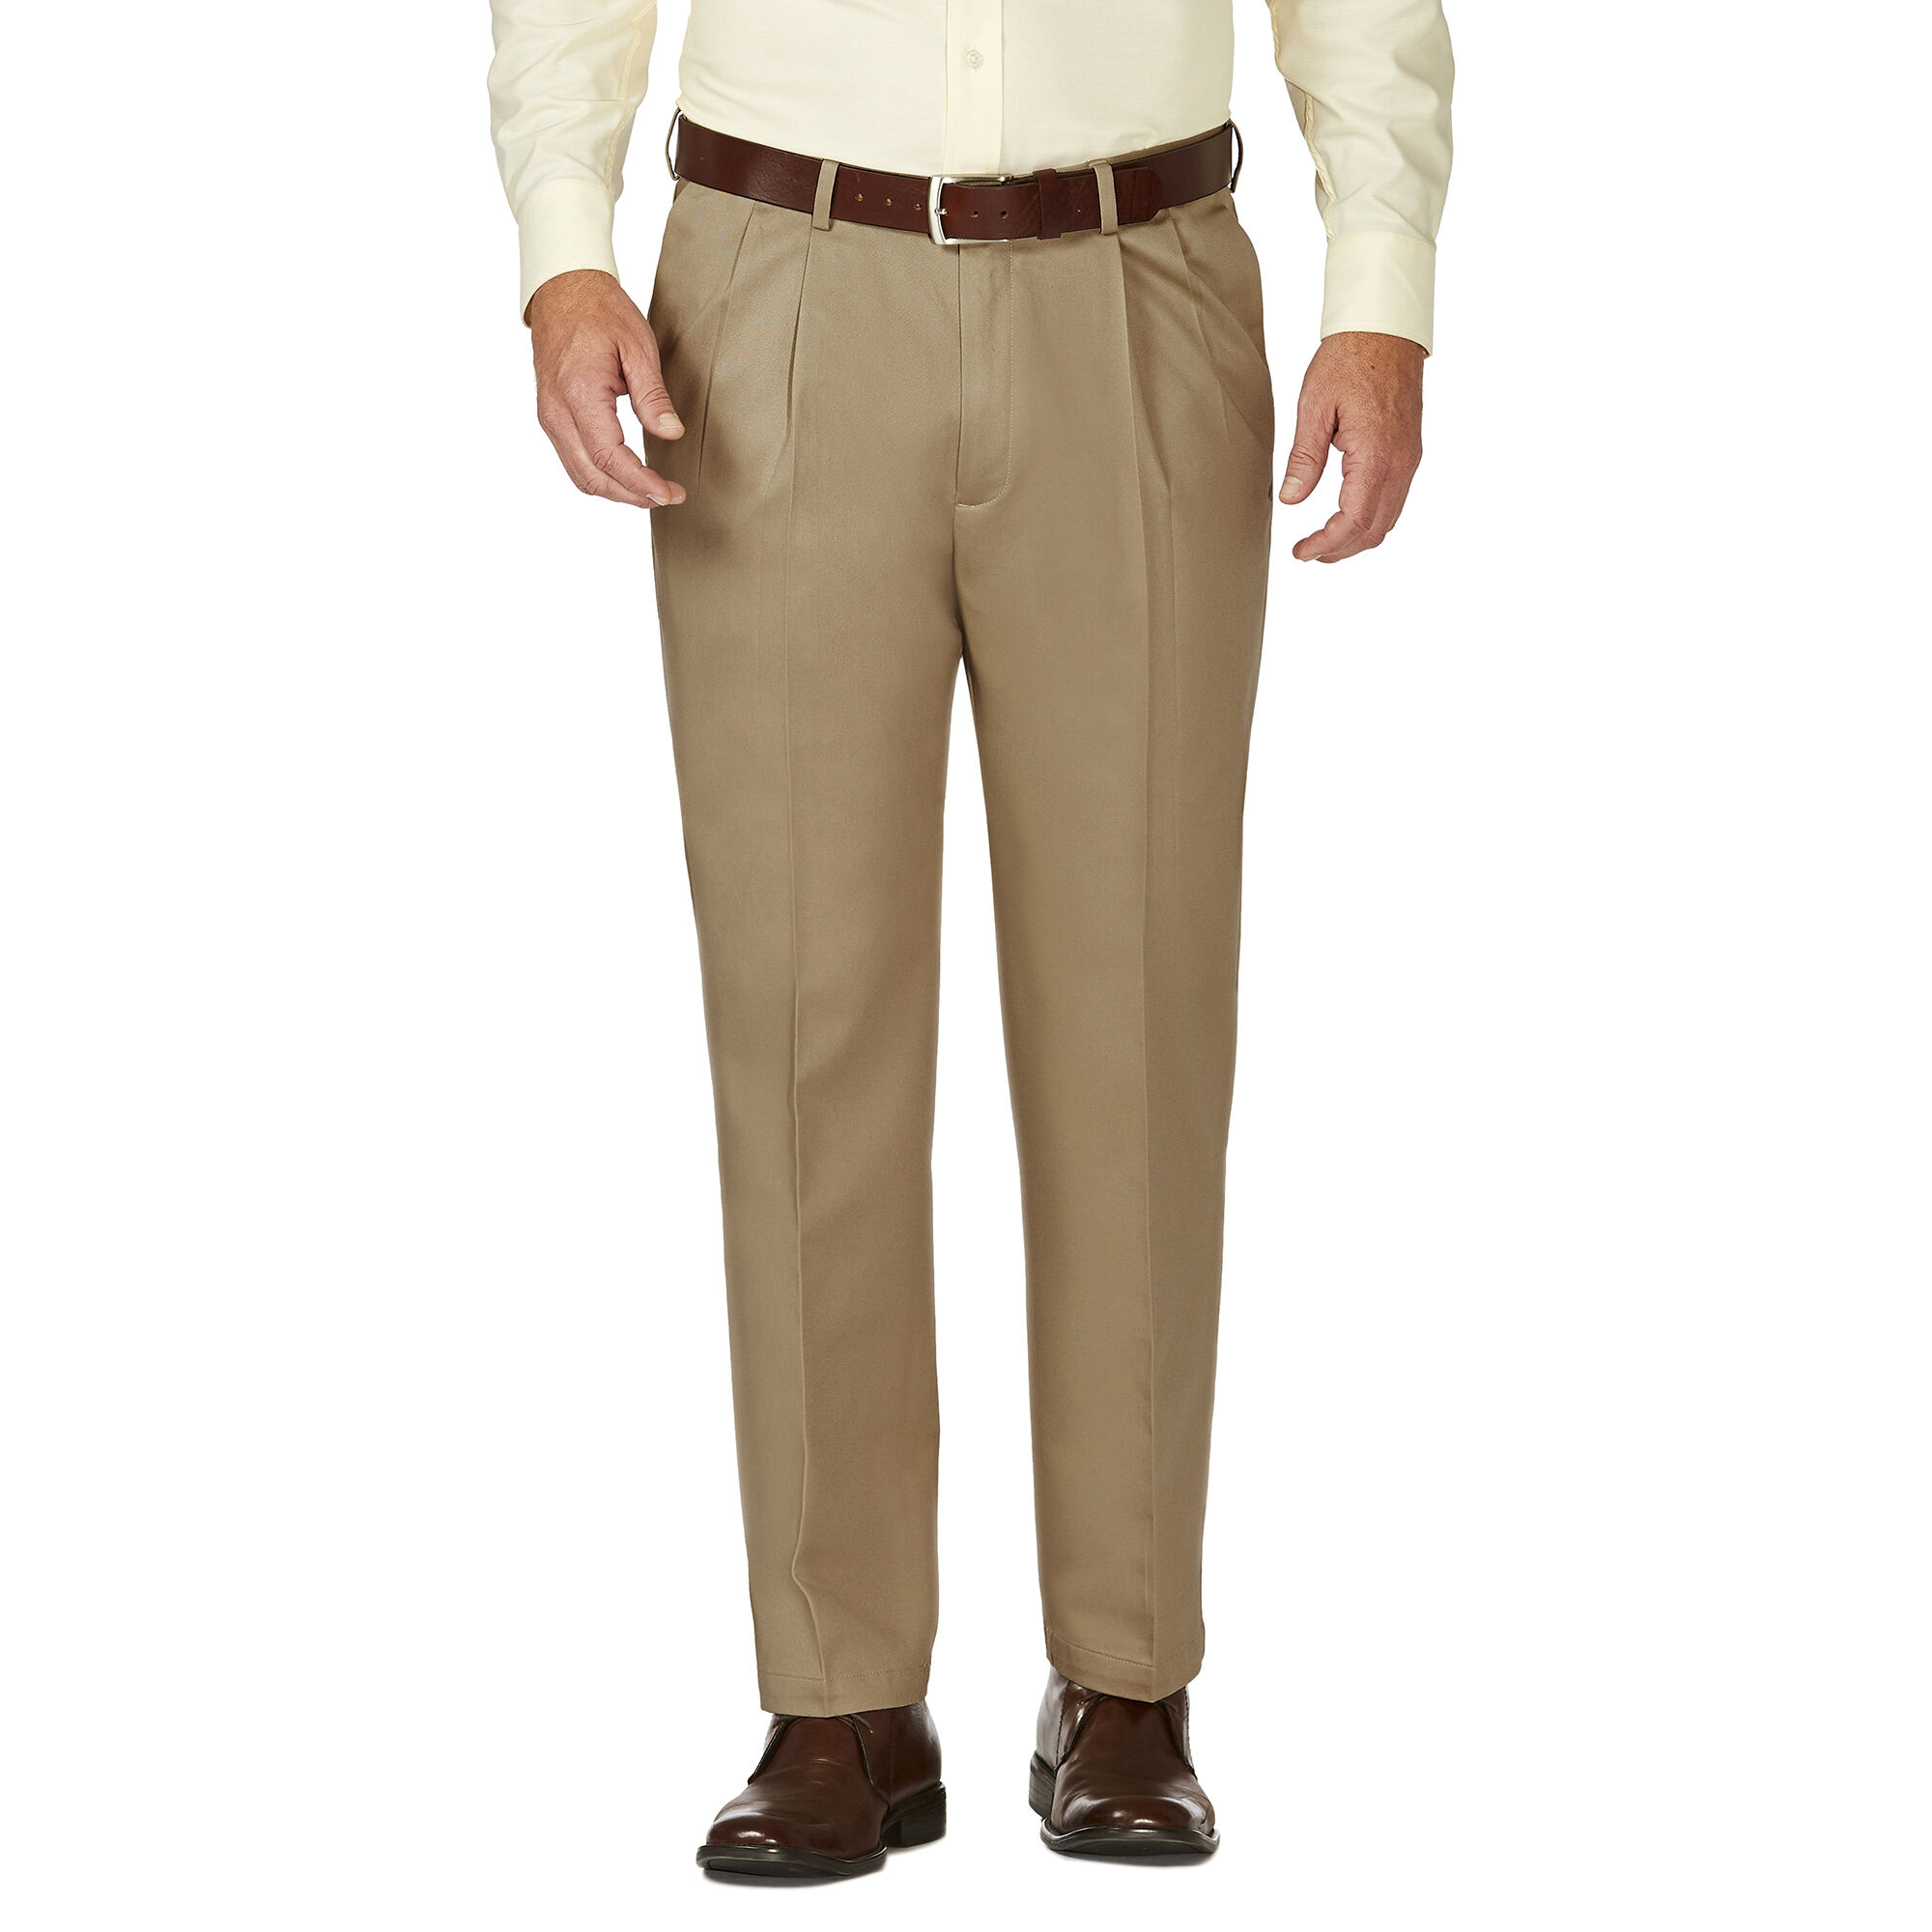 Work to Weekend Khaki | Classic Fit, Pleated, No Iron | Haggar.com